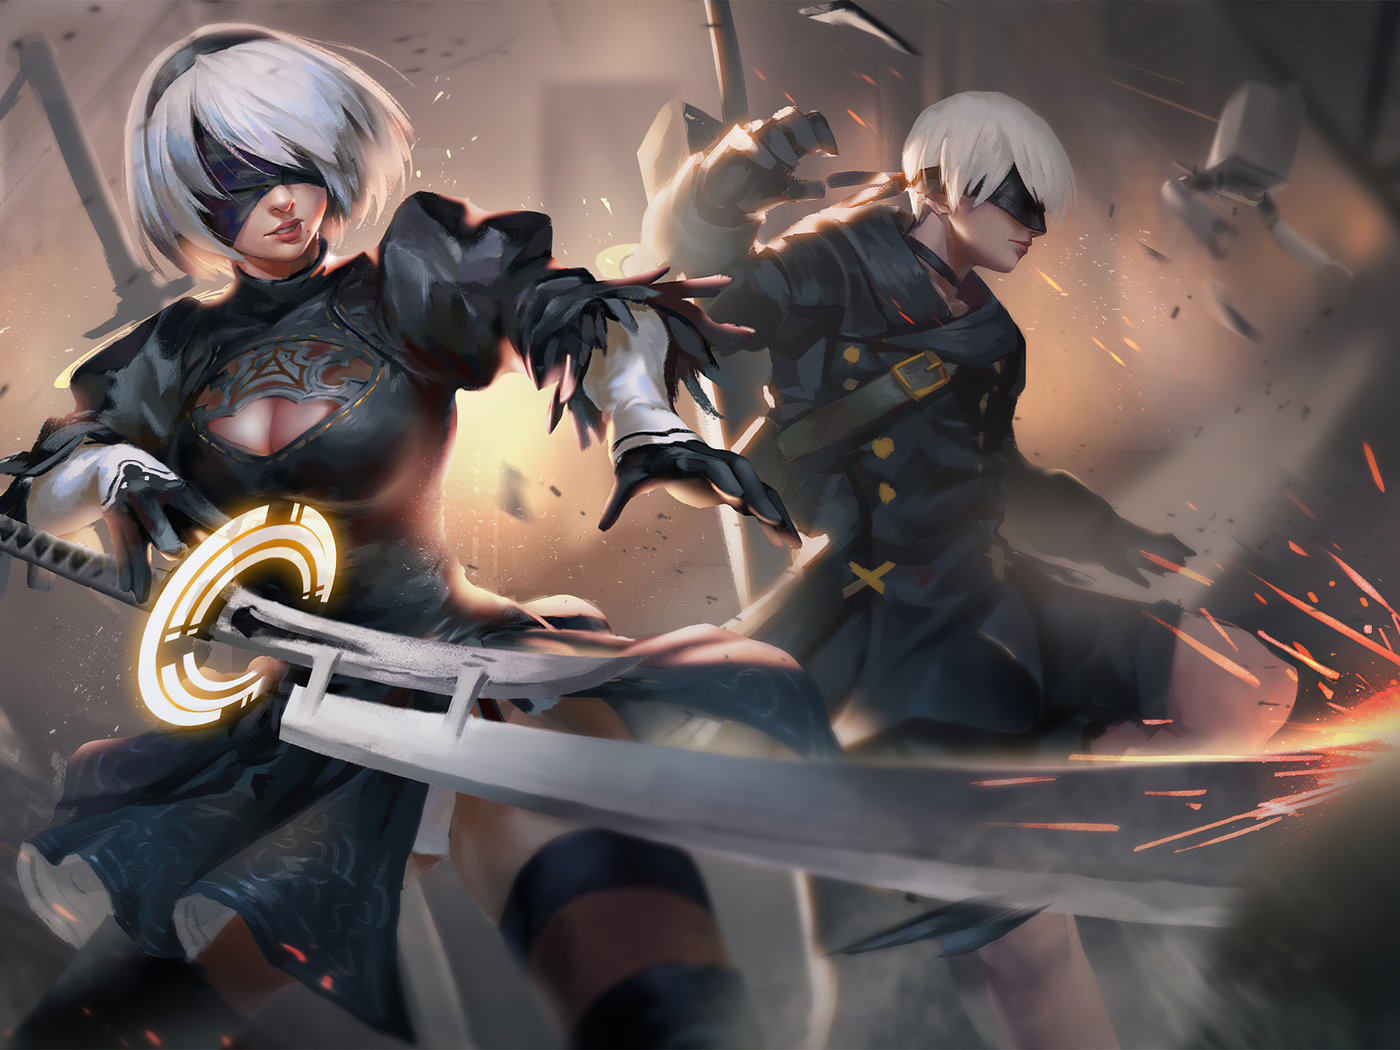 Nier Automata 2b And 9s In 1400x1050 Resolution. nier-automata-2b-and...